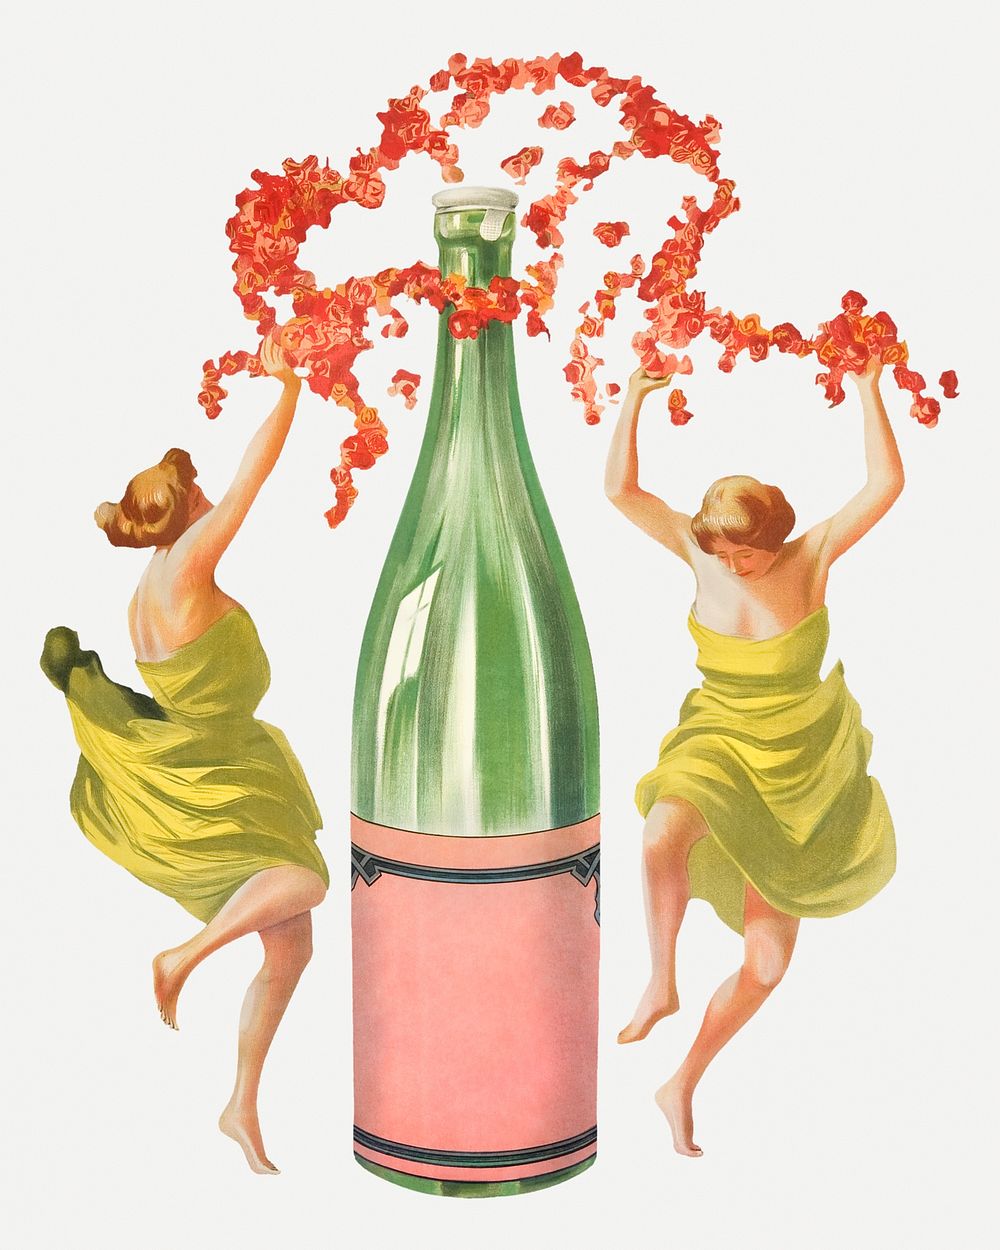 Mineral water bottle with women illustration, remixed from artworks by Leonetto Cappiello